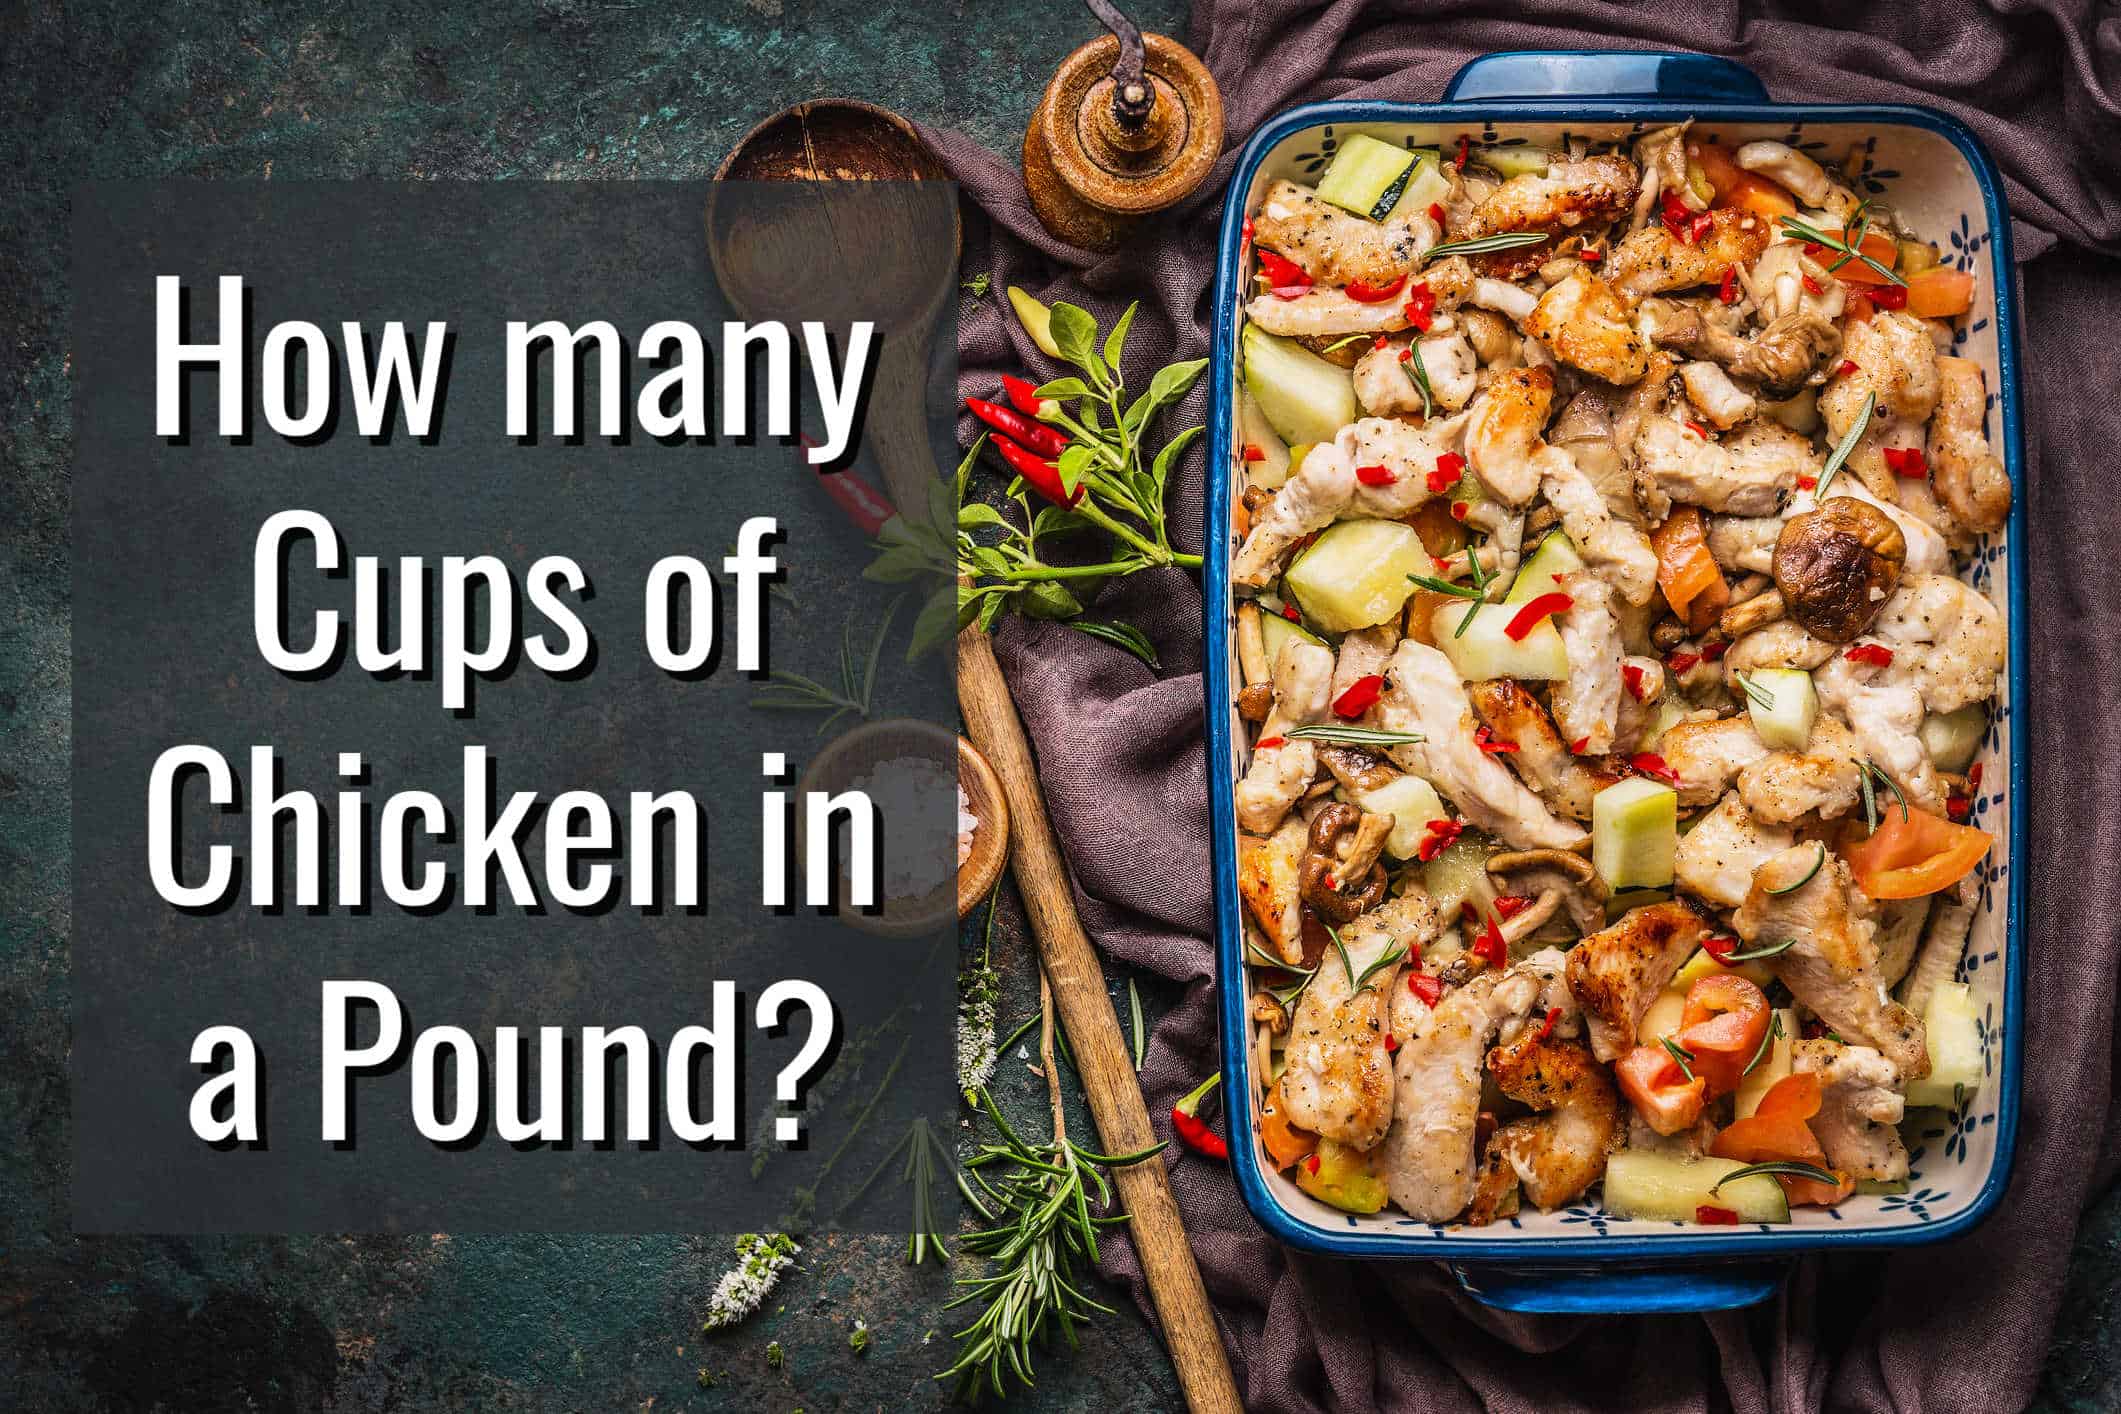 How Many Cups are in a Pound of Chicken?